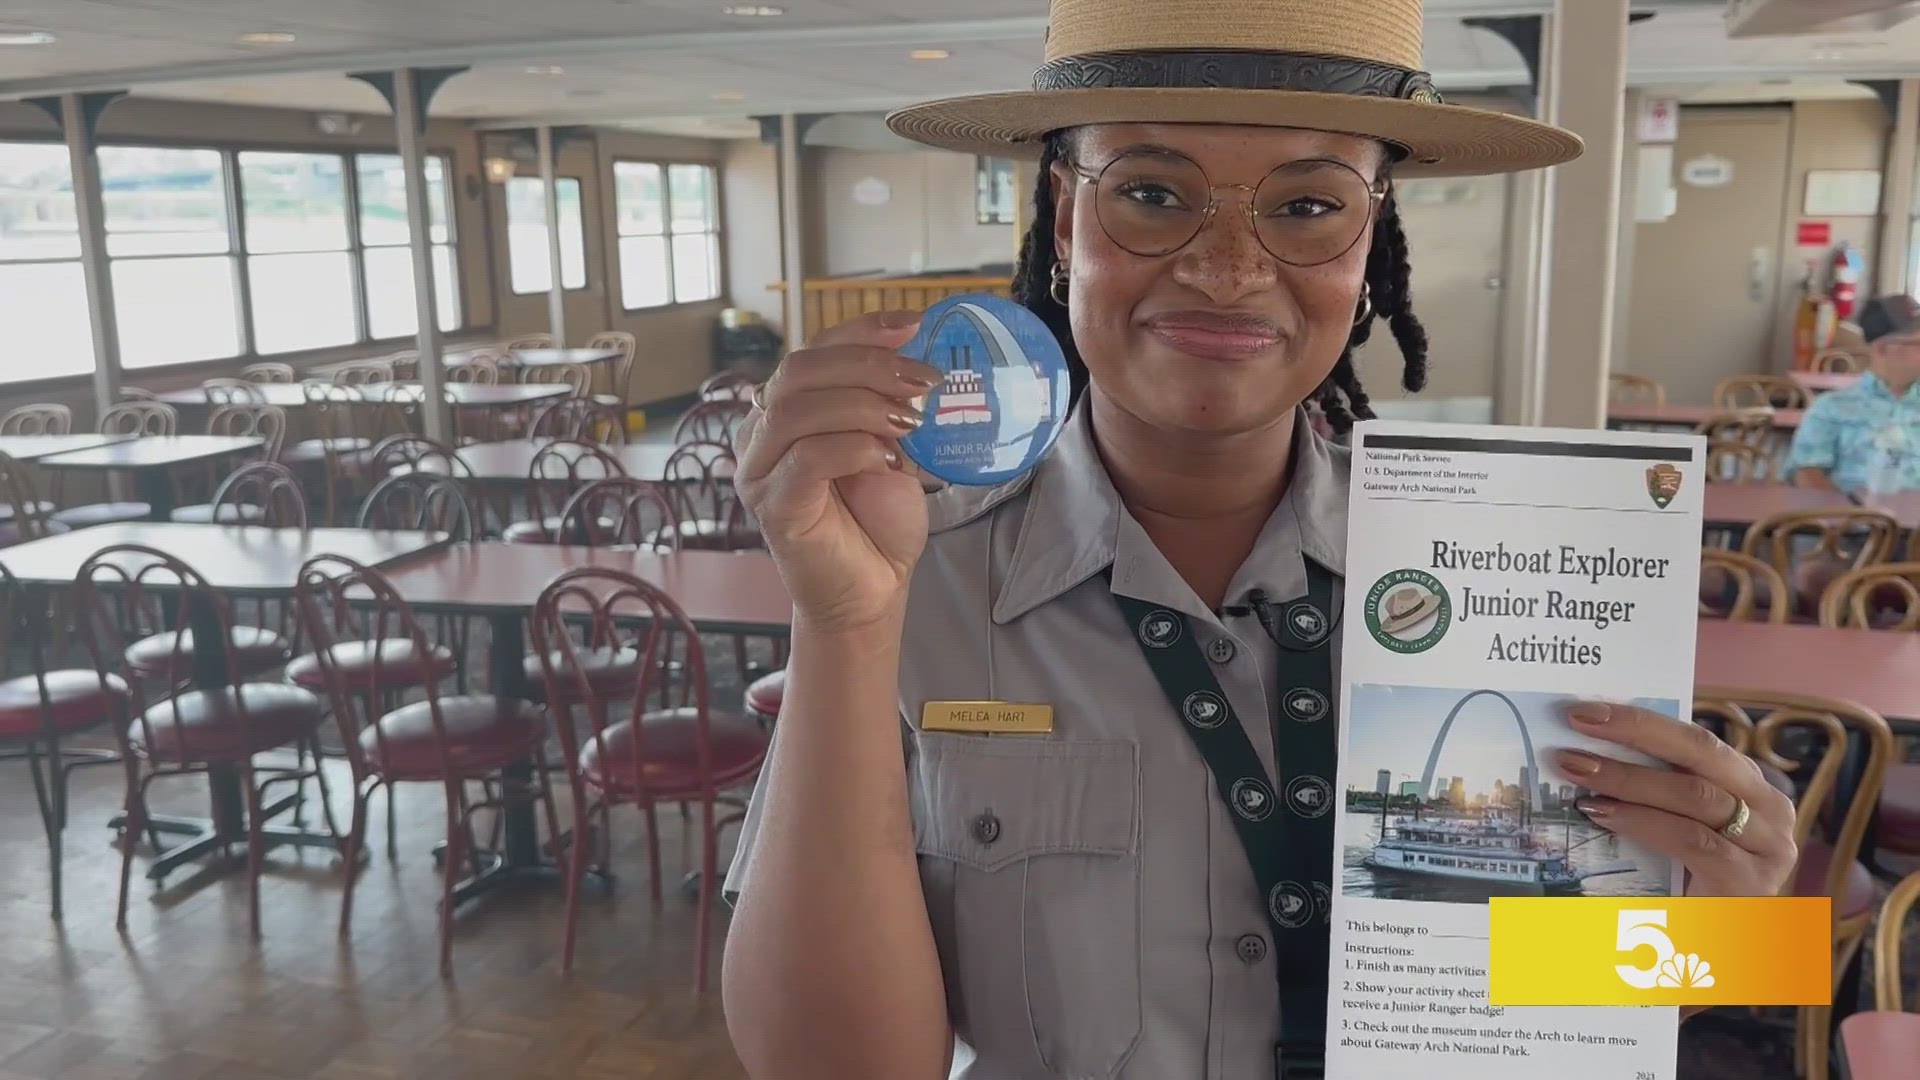 The program invites young explorers to set sail on the Mighty Mississippi and learn about river travel, historic St. Louis, invasive species, and more.